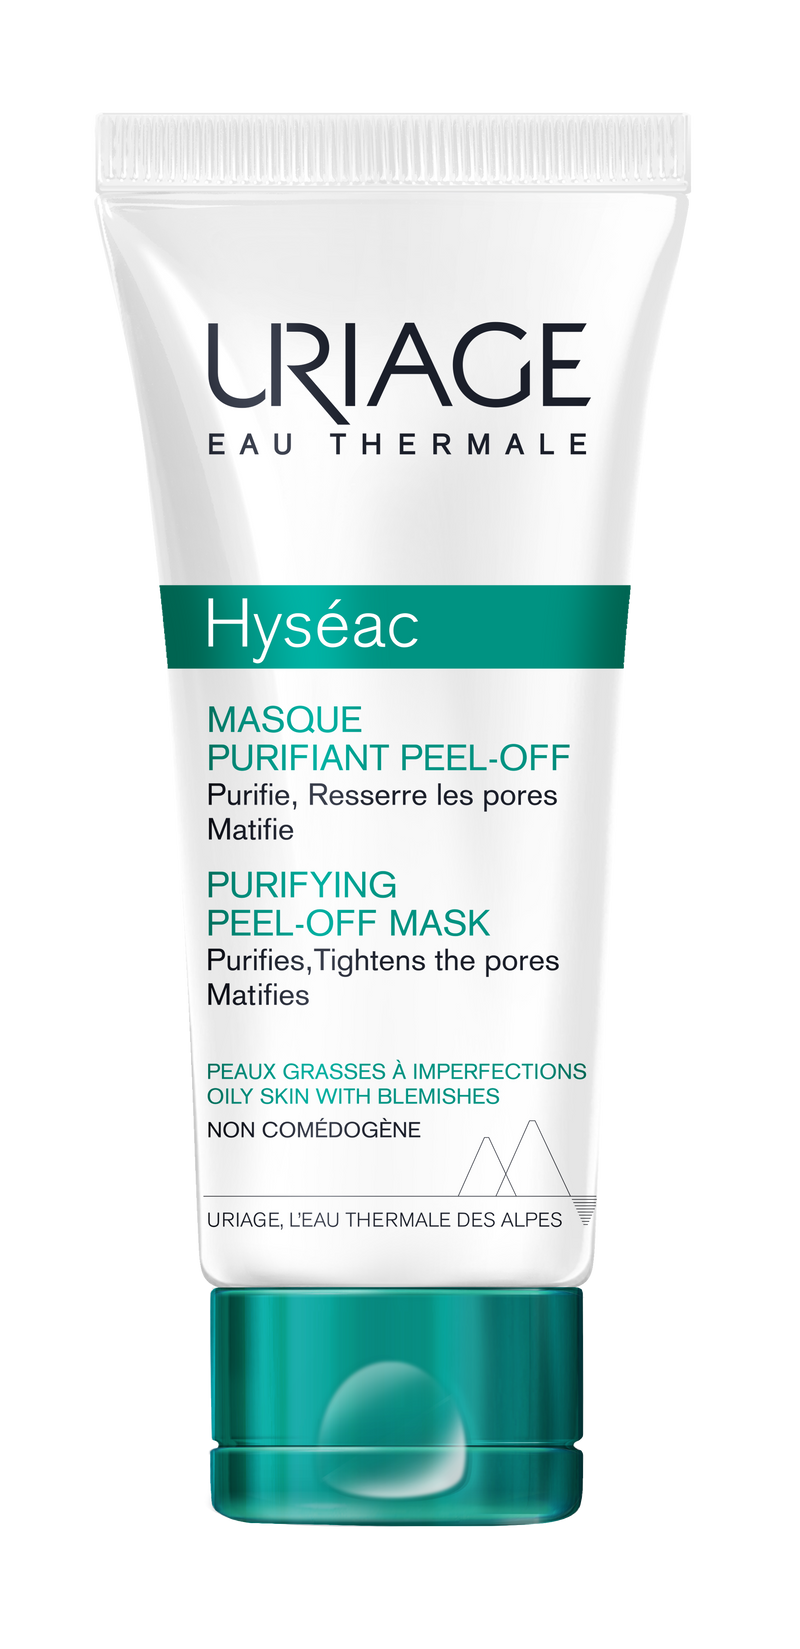 URIAGE HYSÉAC - Purifying Peel-off Mask